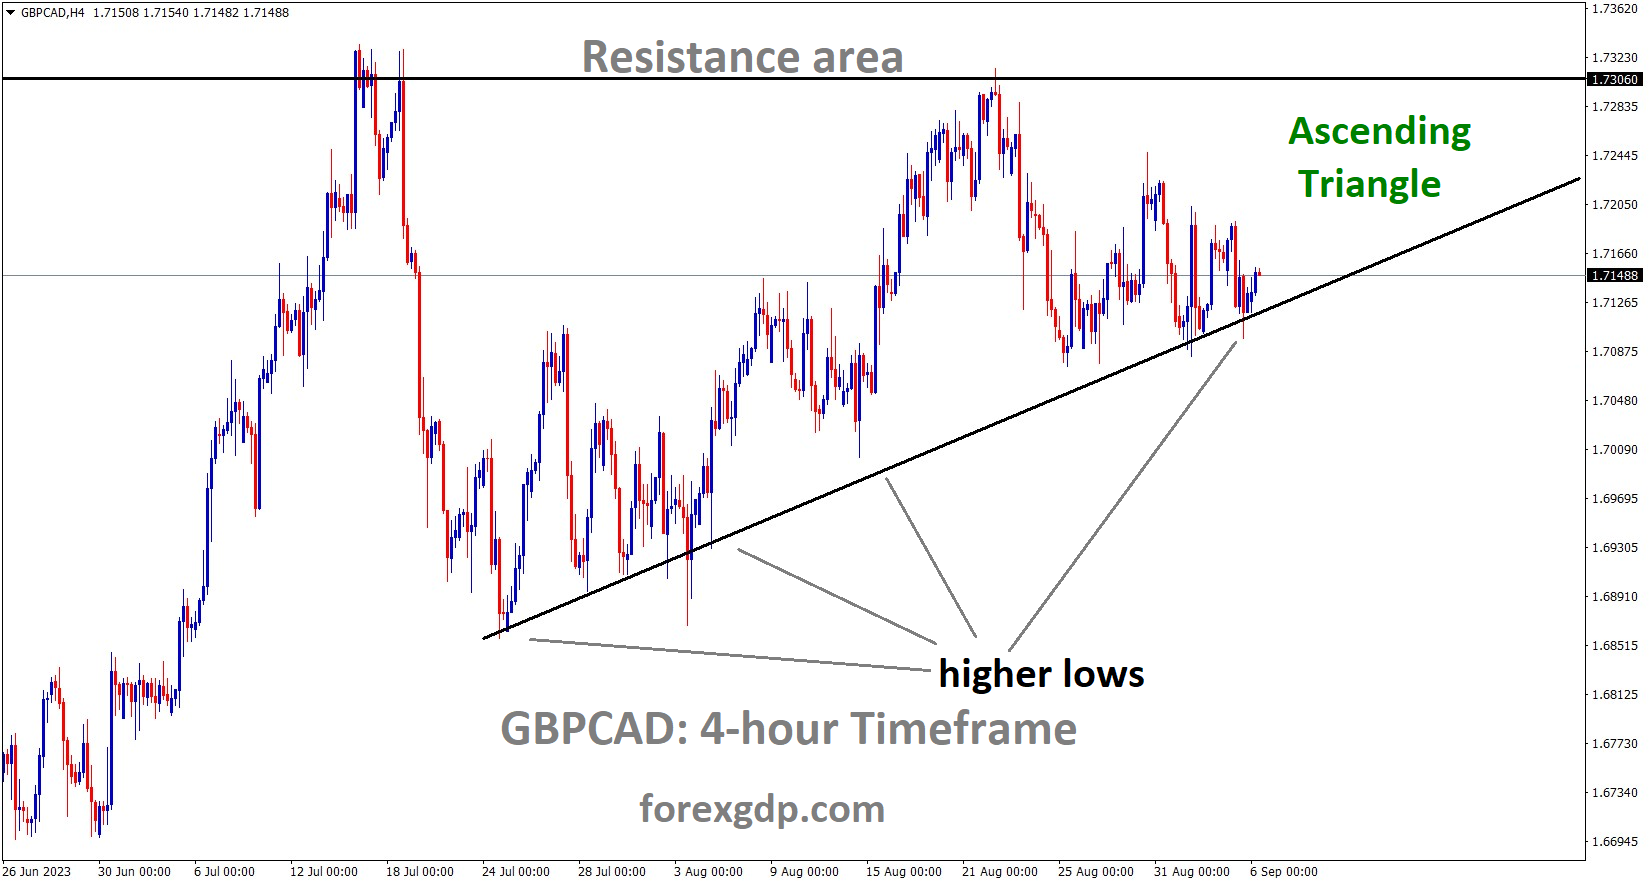 GBPCAD H4 TF Analysis Market is moving in an Ascending triangle pattern and the market has reached the higher low area of the pattern